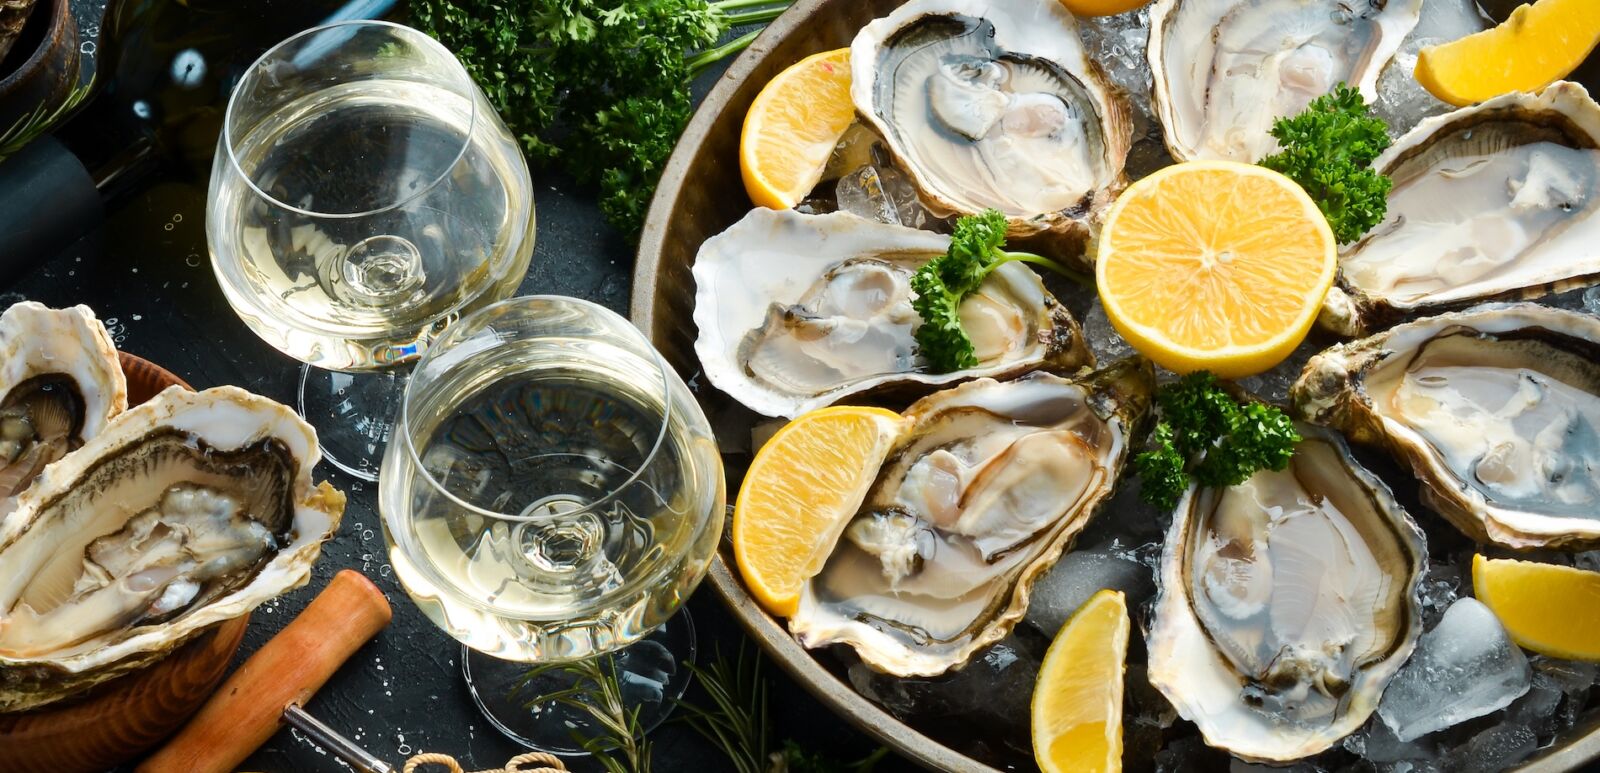 Bottle of aged wine and fresh oysters on a dark kitchen table. Seafood. Top view. Photo via Shutterstock.